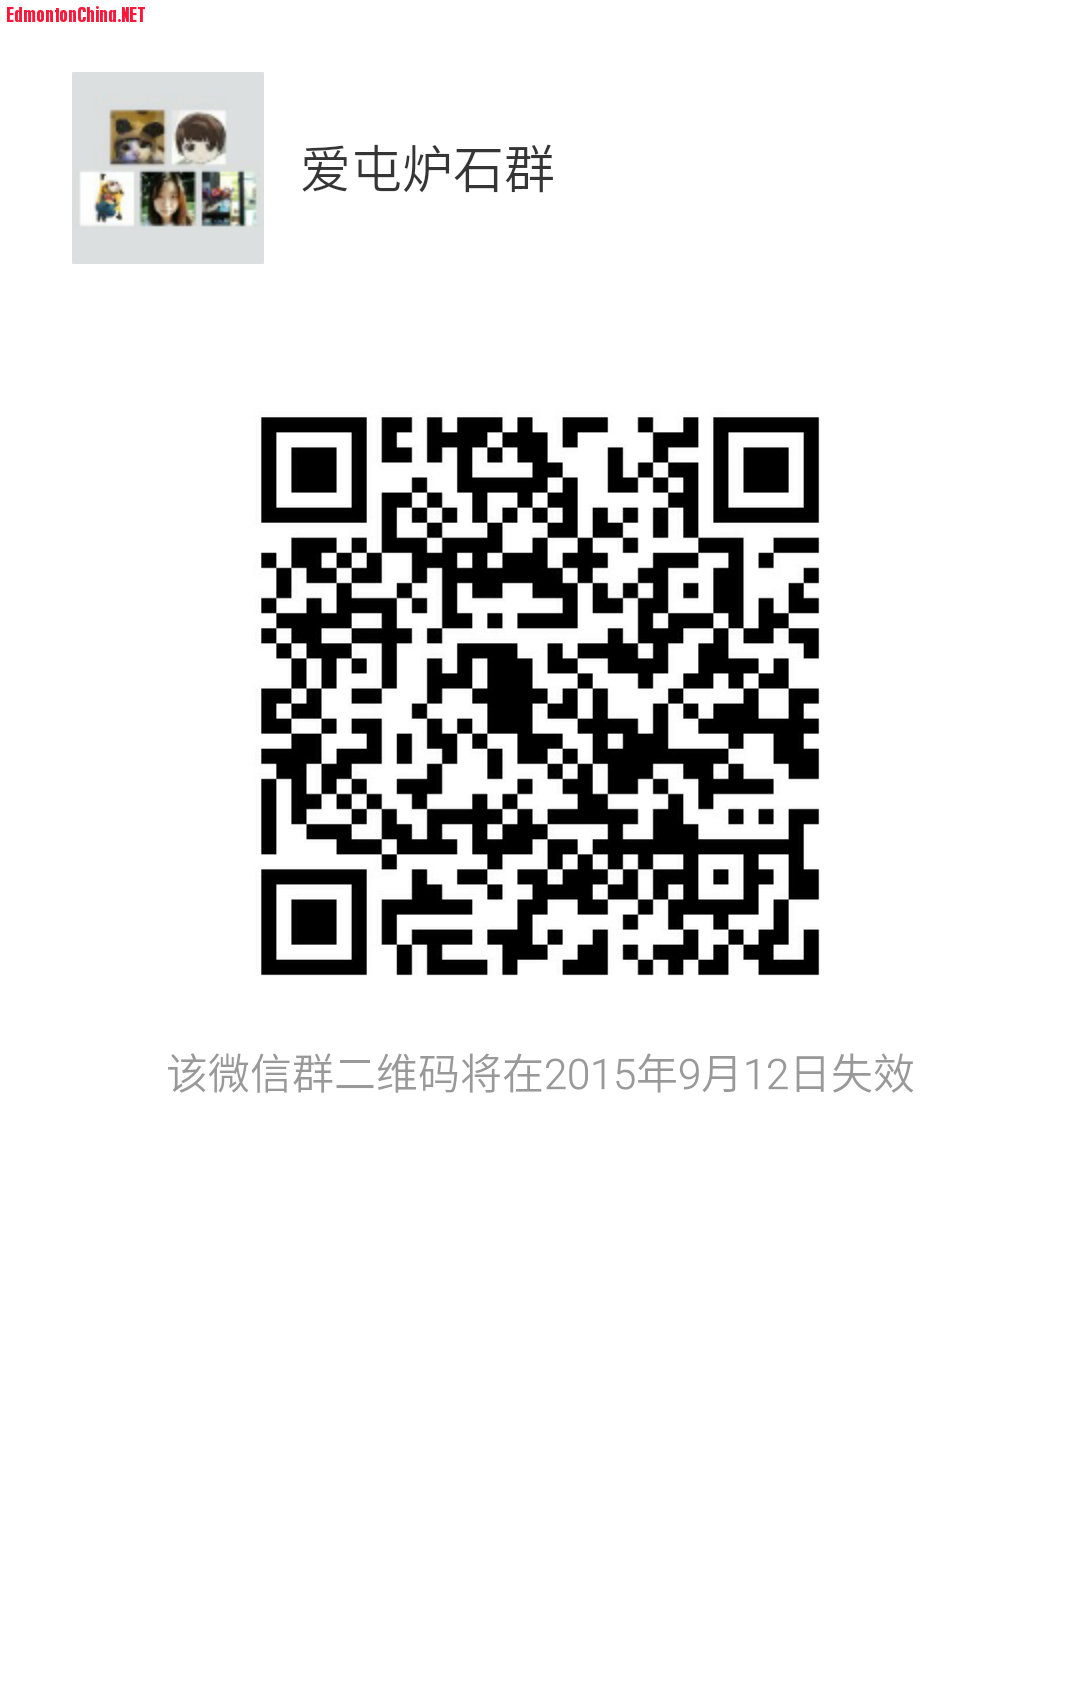 mmqrcode1441480320411.png